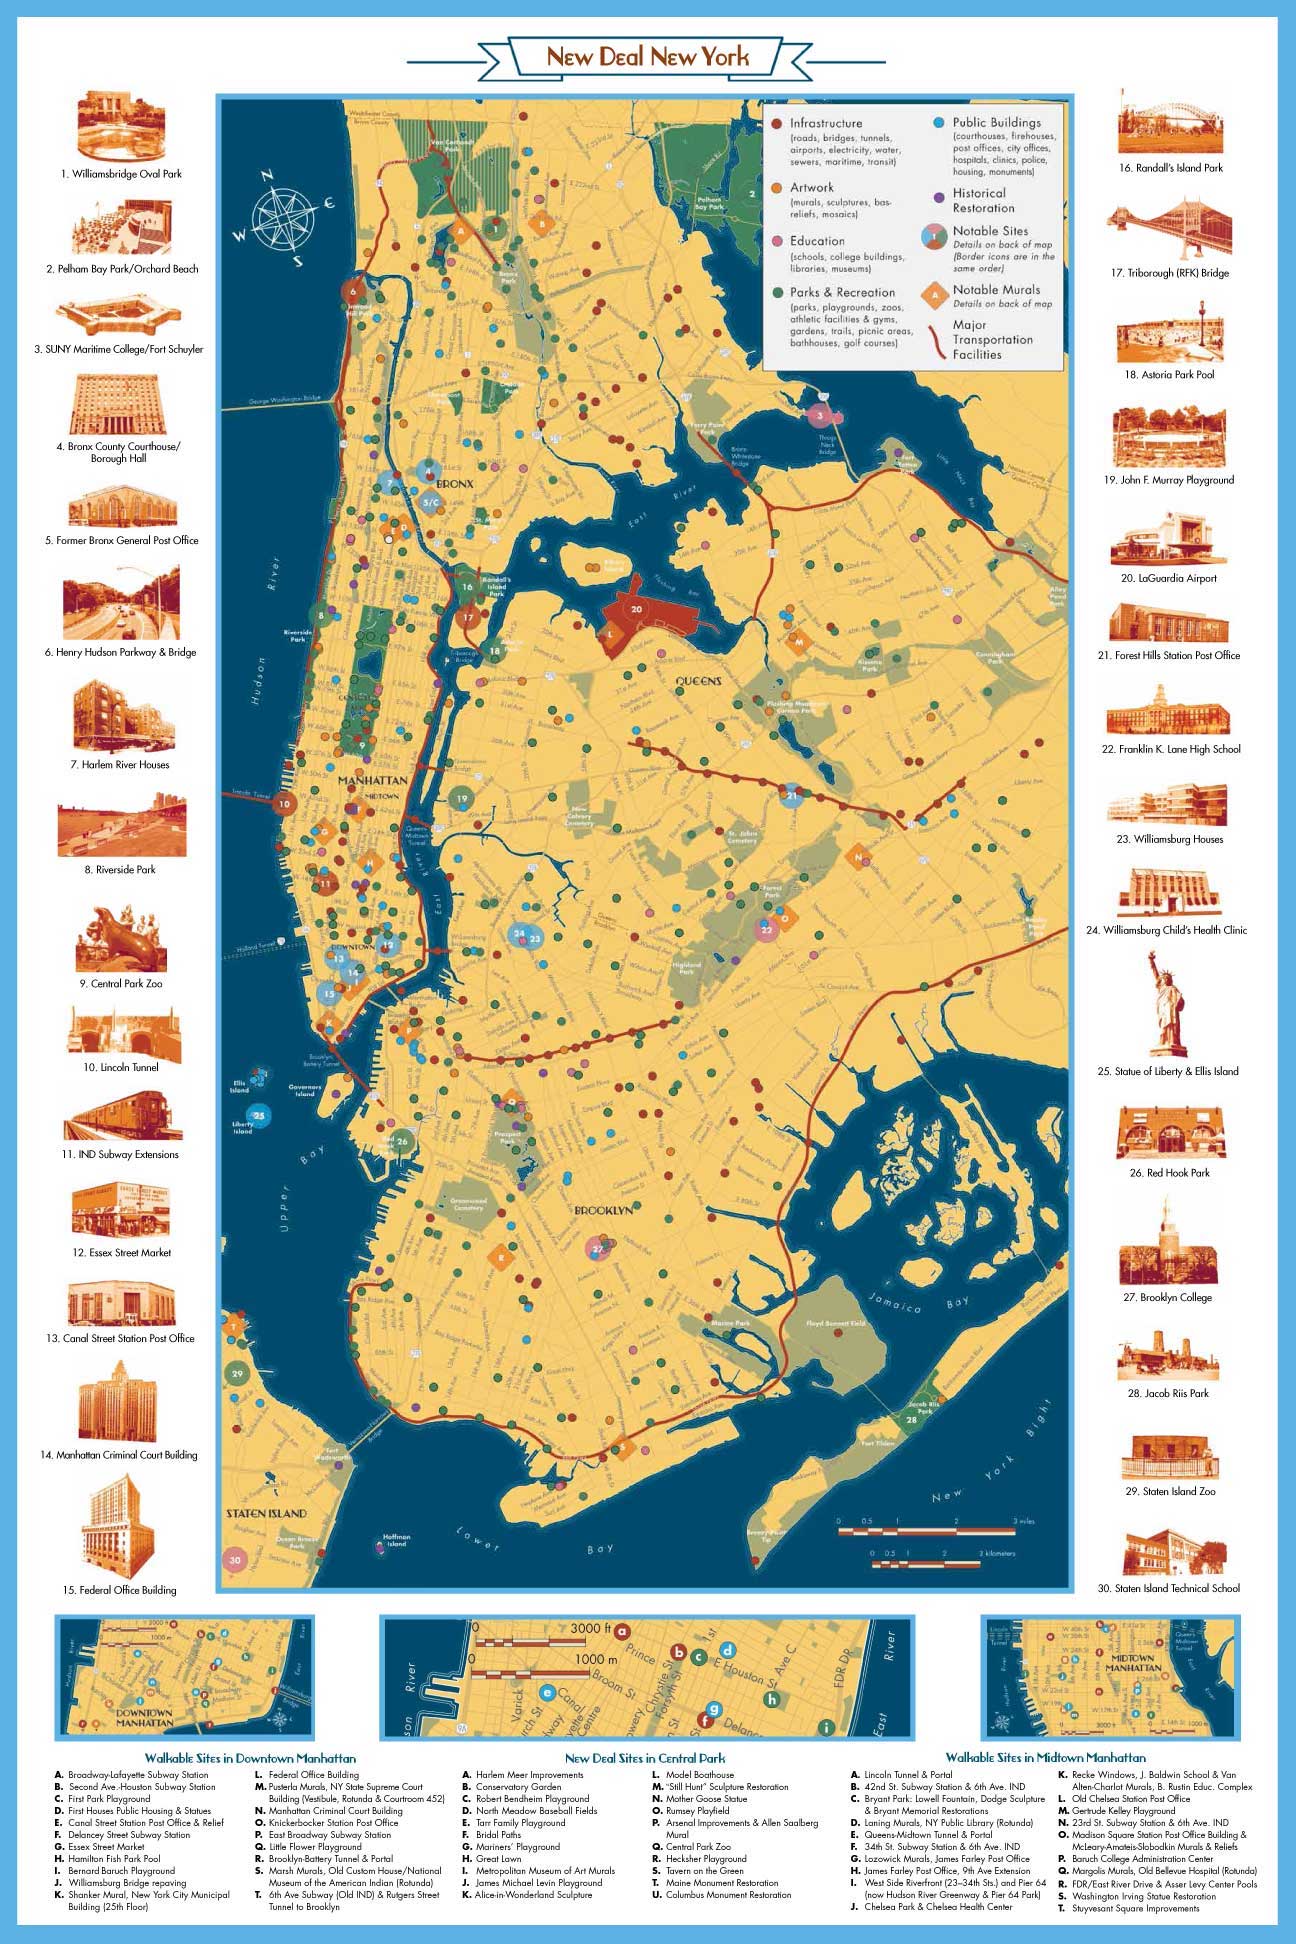 A map of New Deal sites in New York City